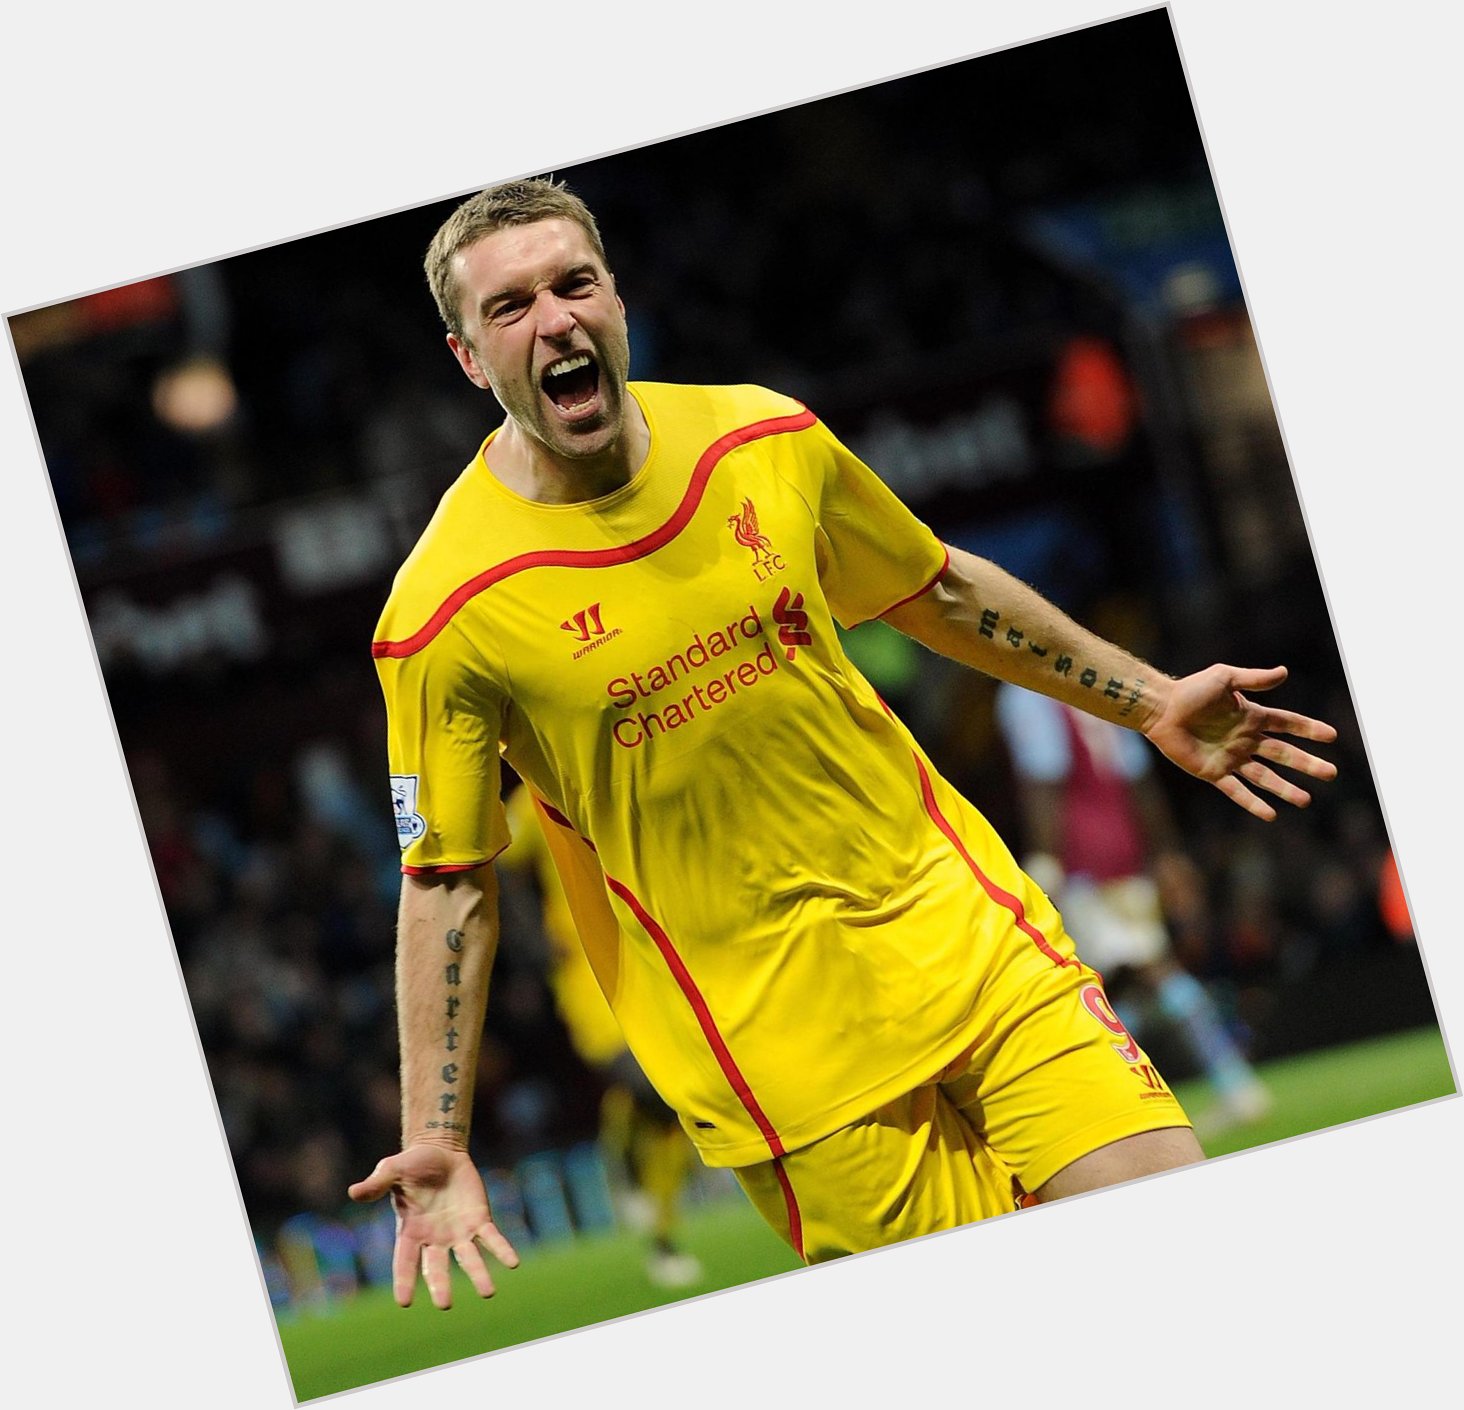 Happy birthday to striker Rickie Lambert - the No.9 is celebrating his 33rd today. 